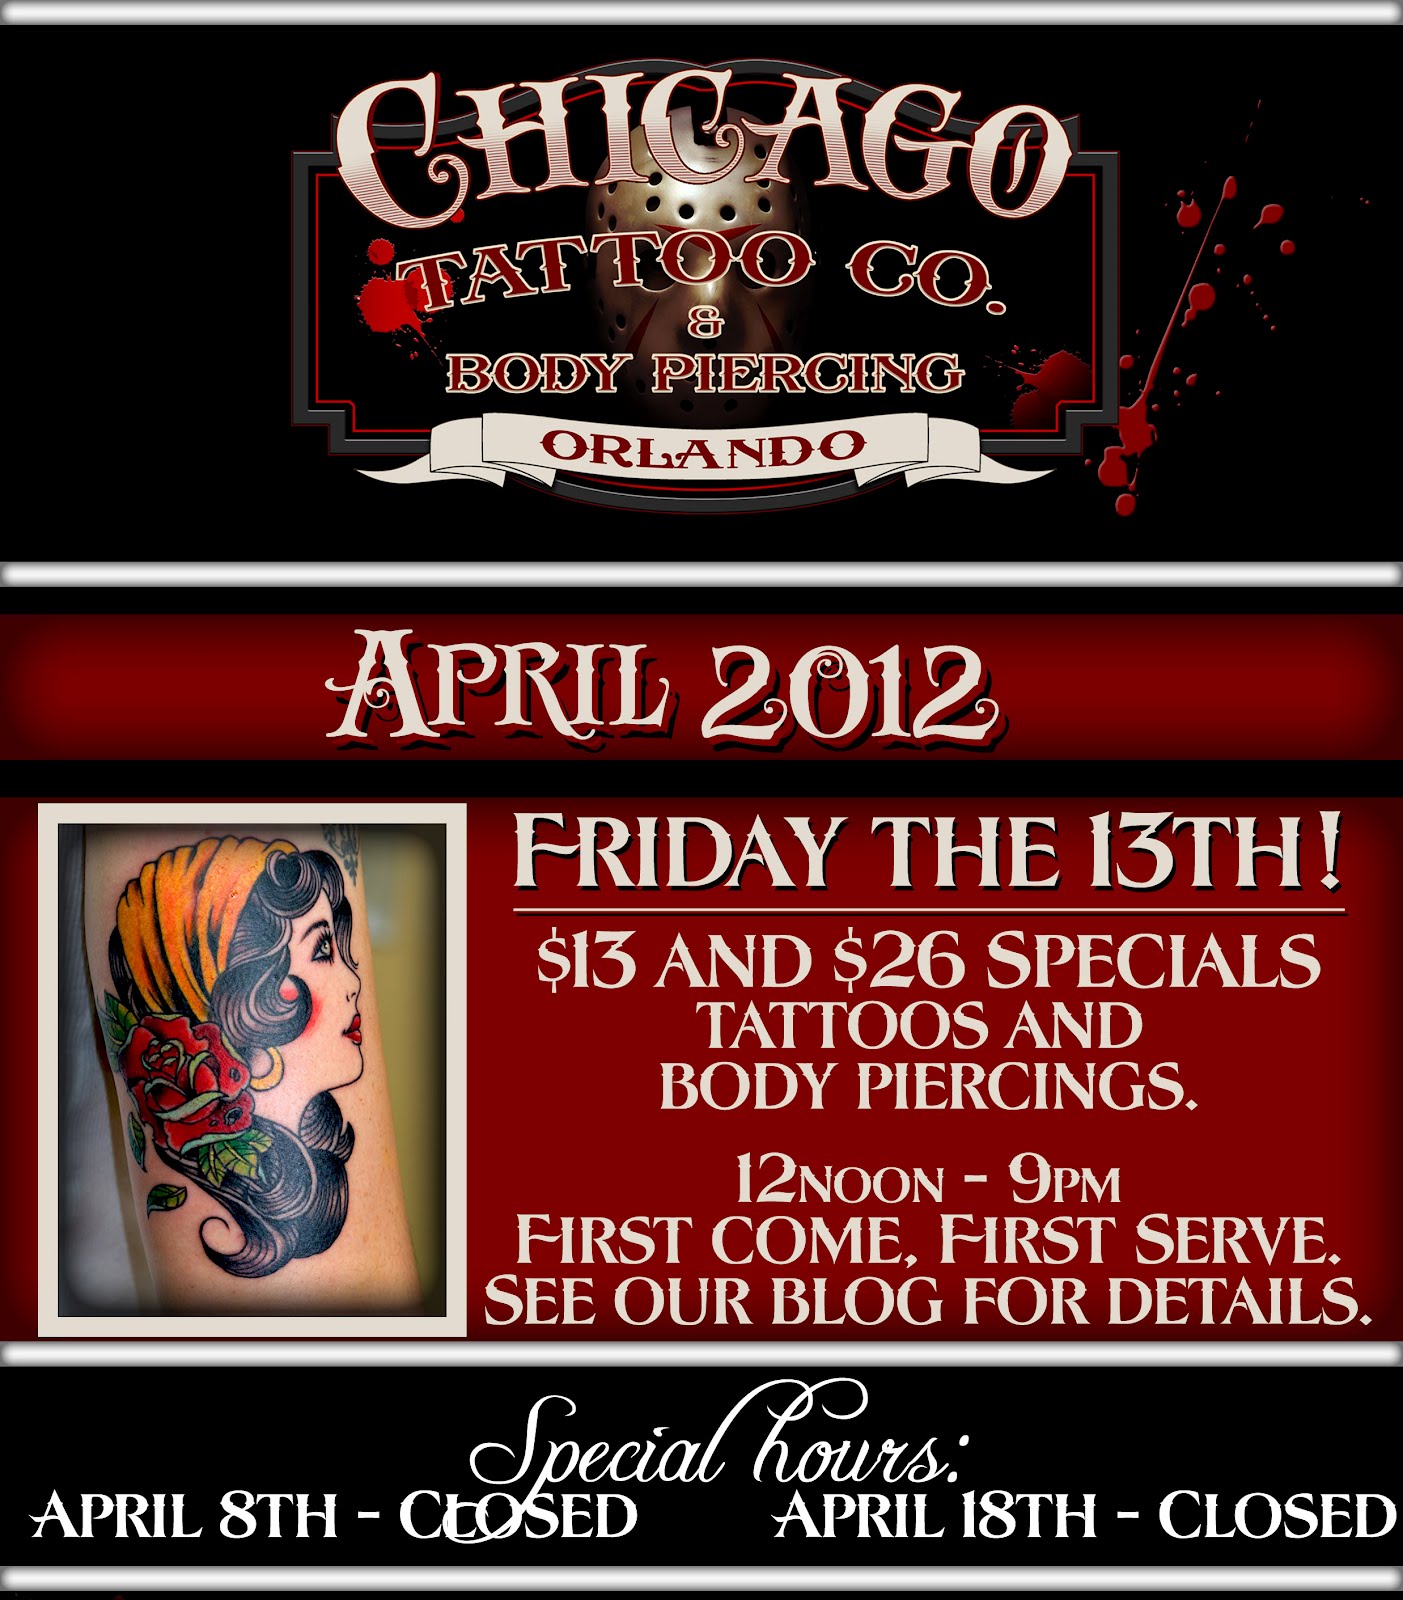 Chicago Tattoo Co: Friday the 13th Specials are here!